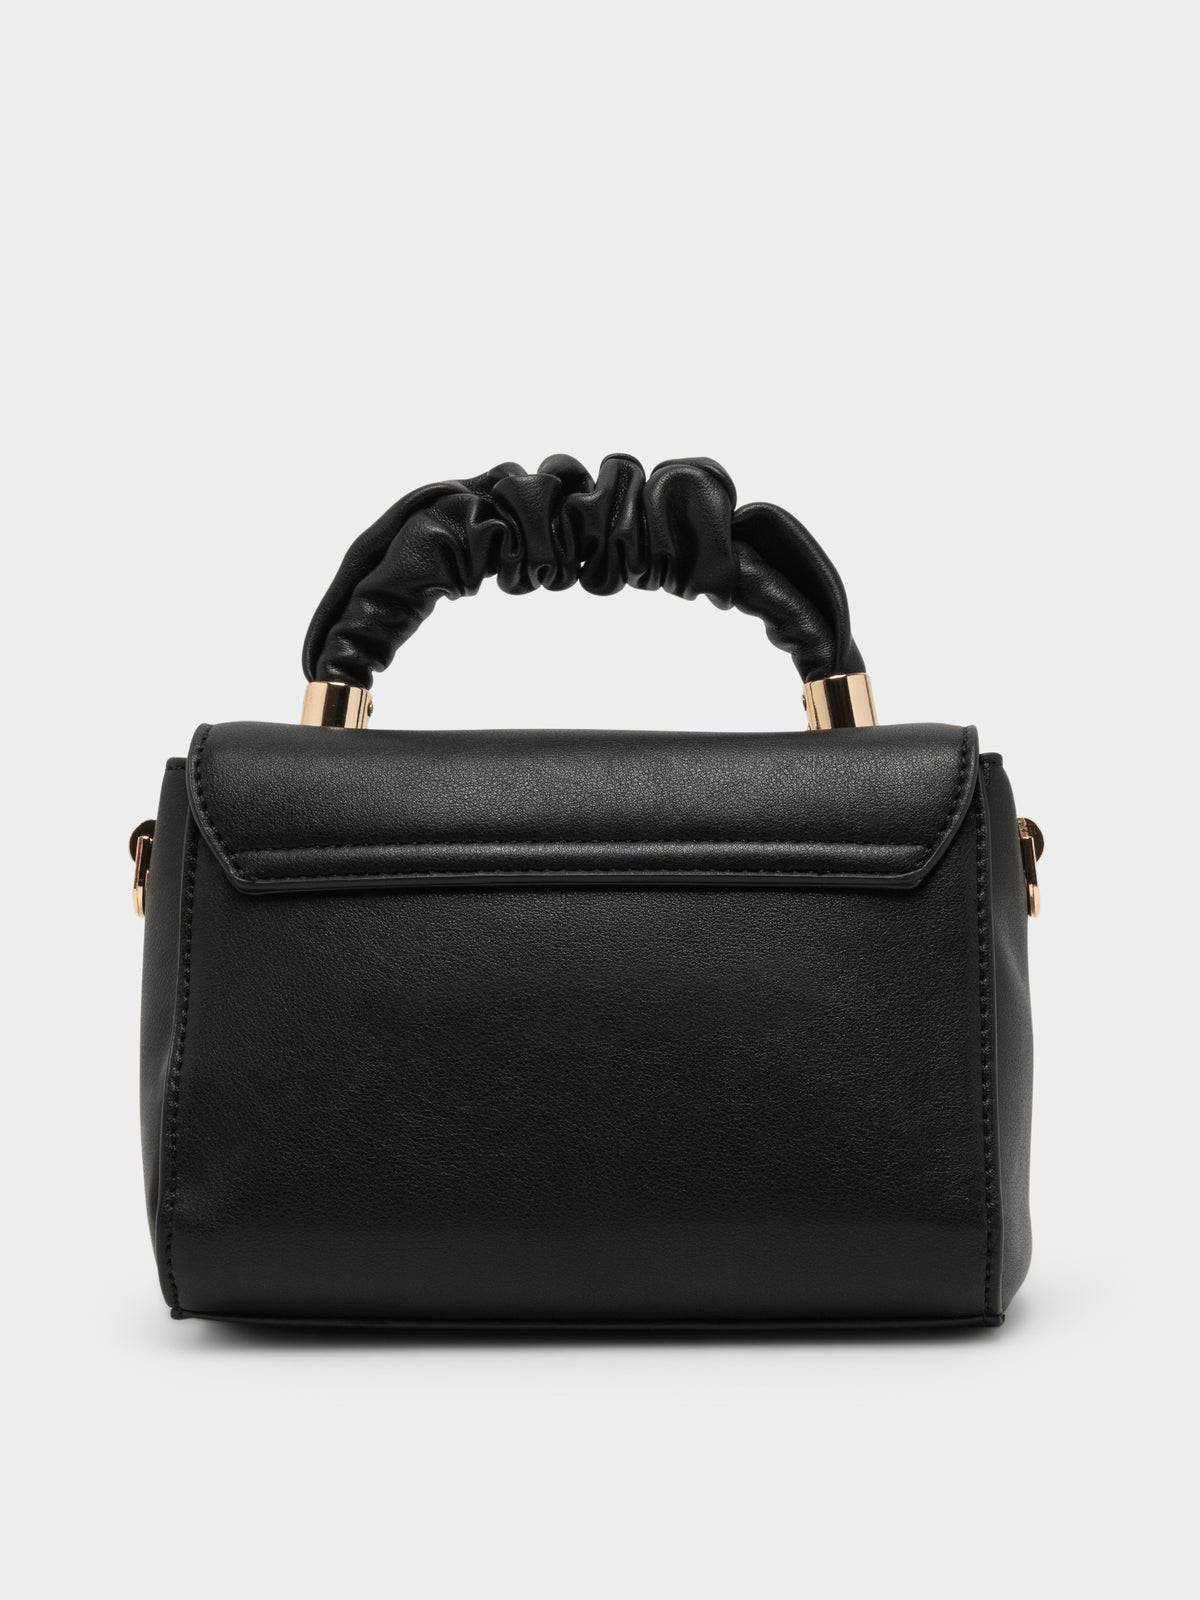 Kendall Gathered Bag in Black